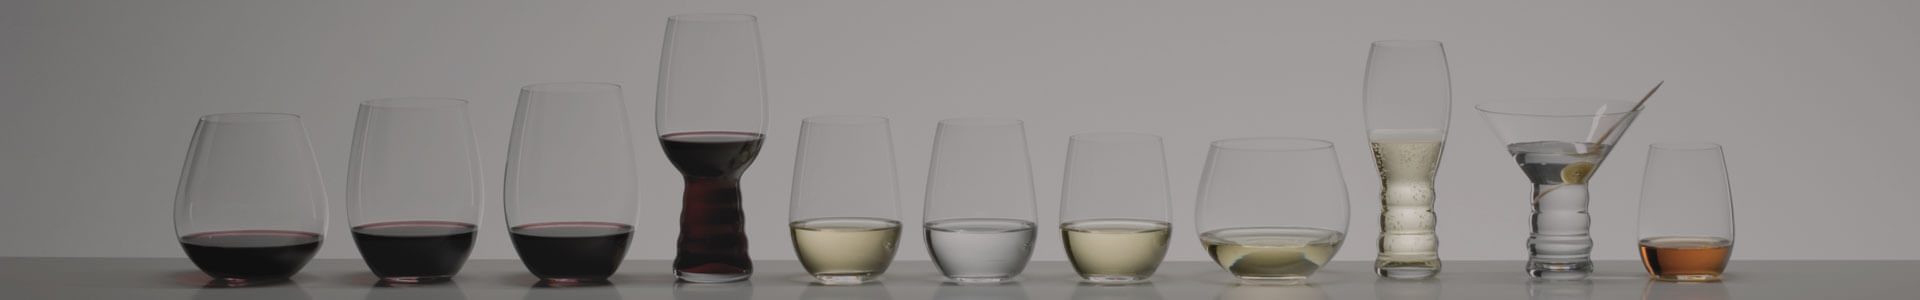 Various glasses from the series O by manufacturer Riedel stand next to each other.